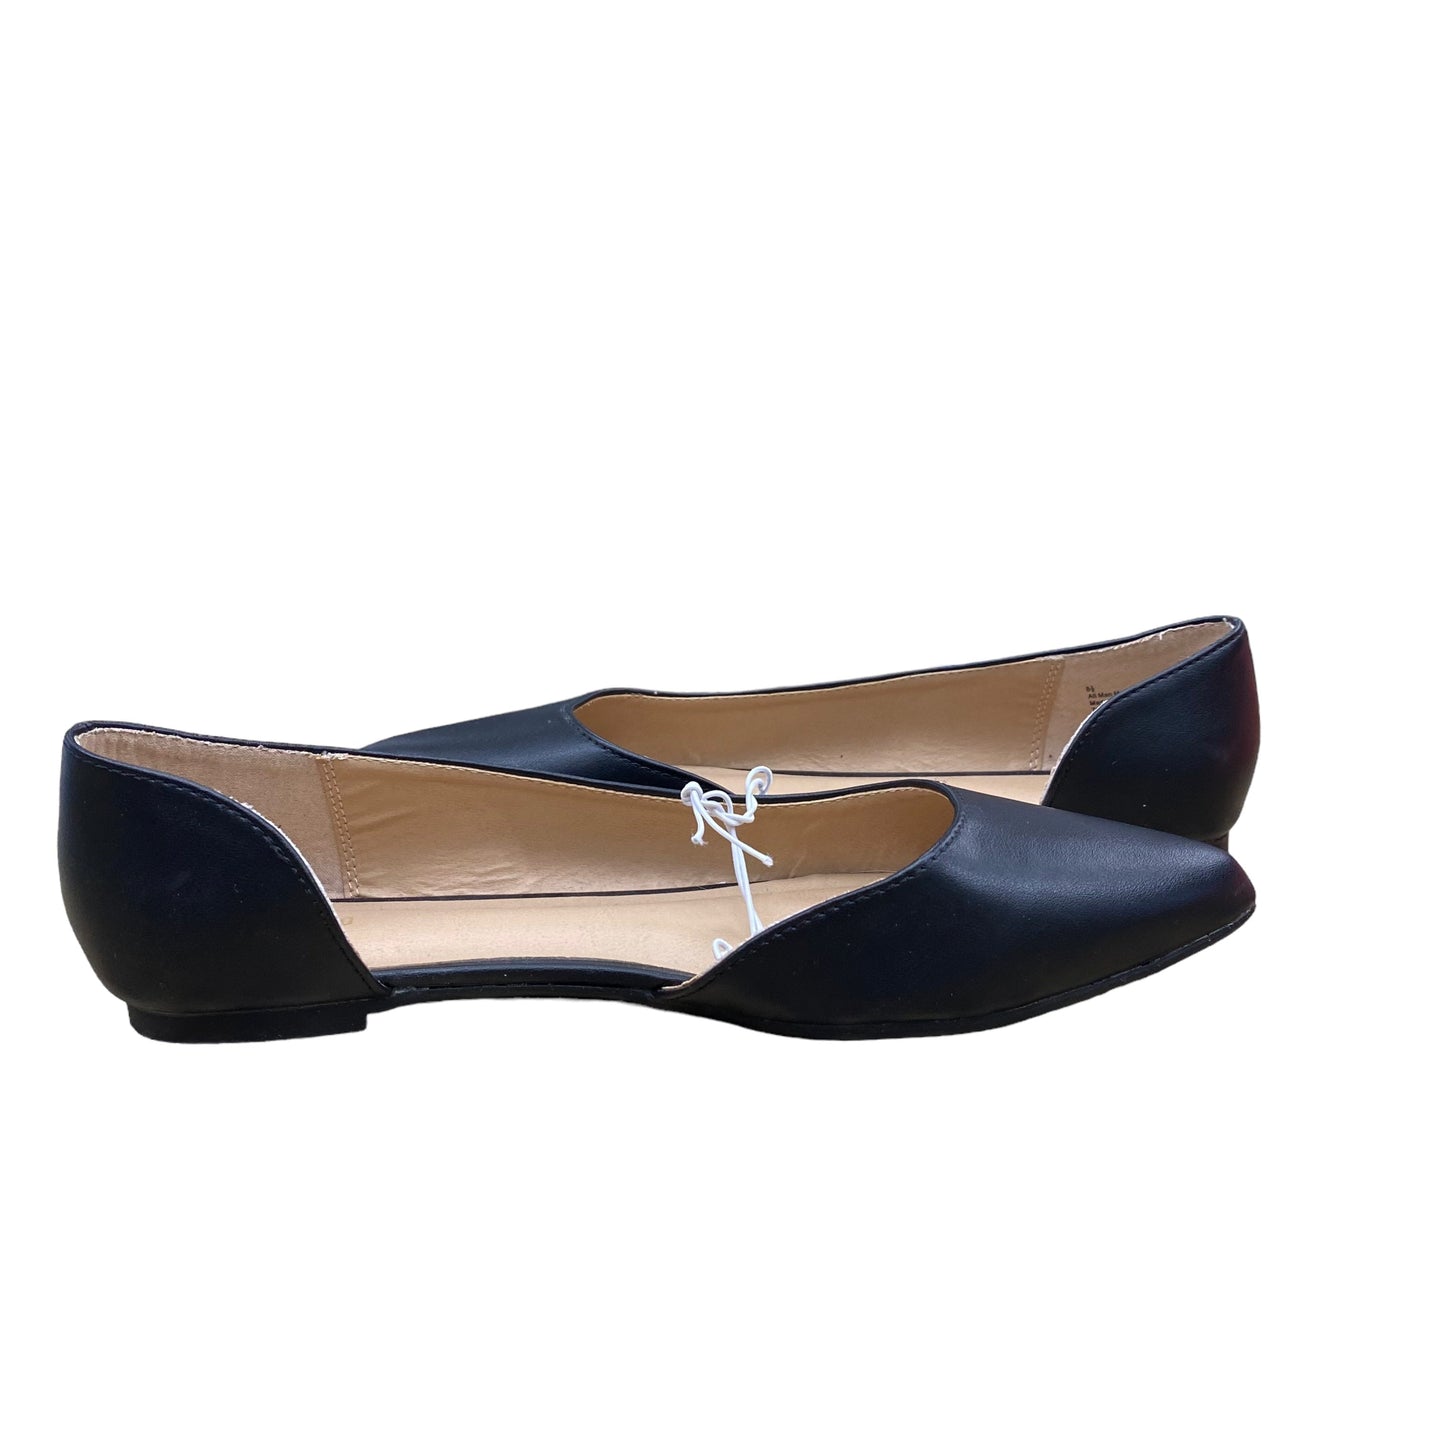 Shoes Flats By Mossimo  Size: 8.5